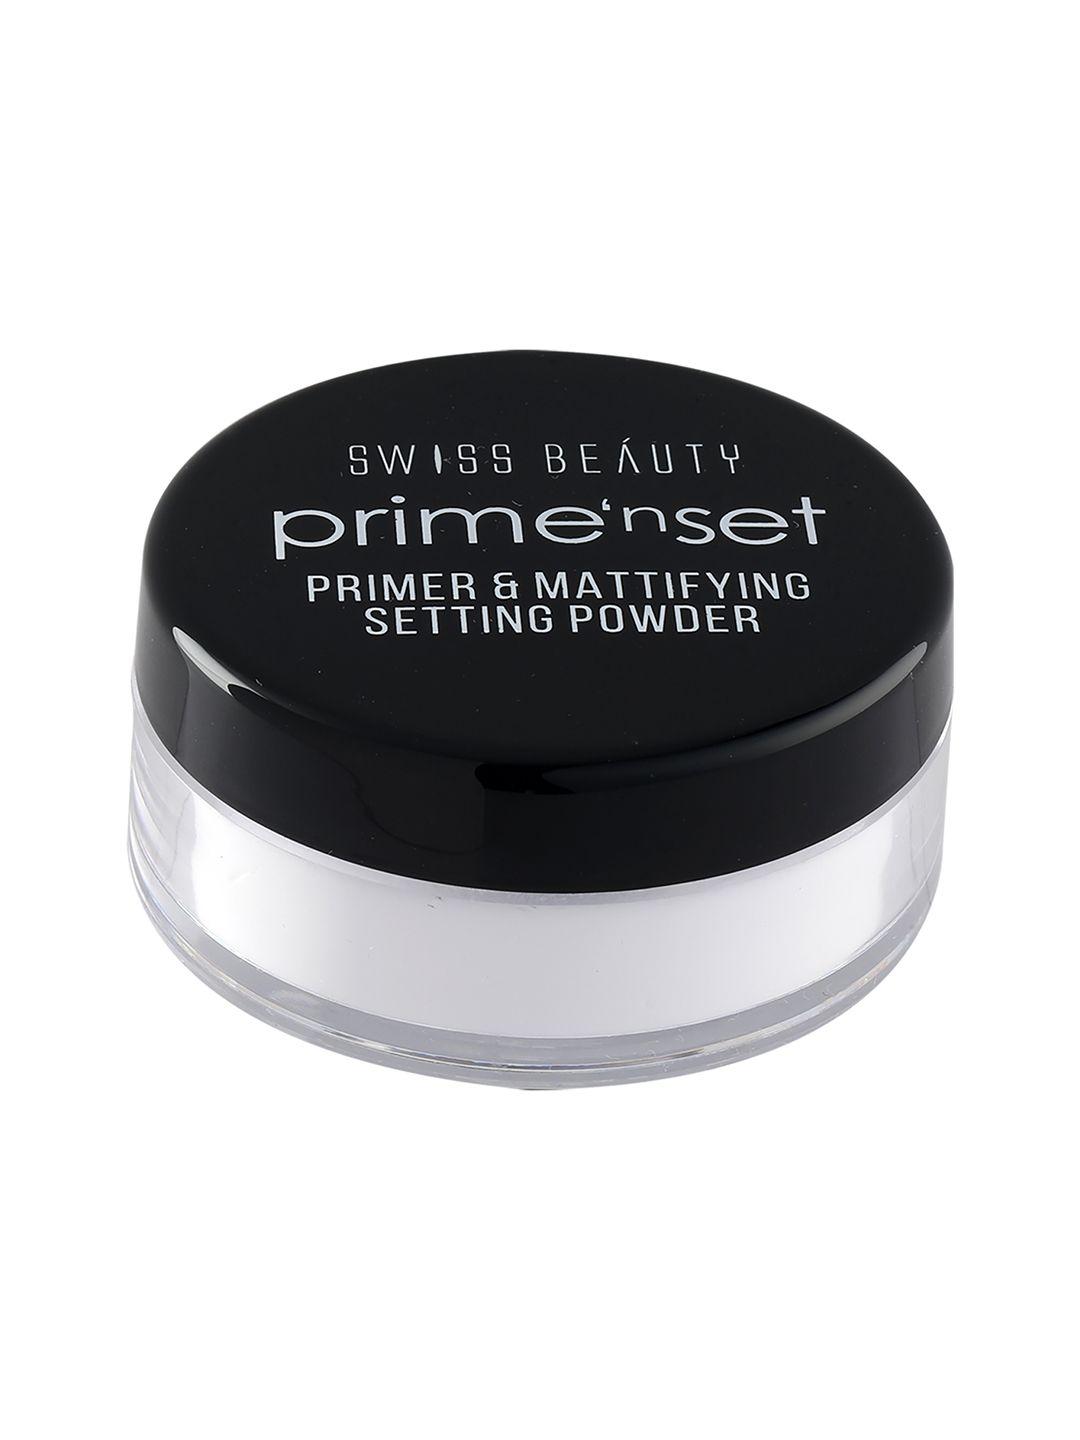 swiss beauty prime'nset primer & mattifying setting powder with spf15 - 10g